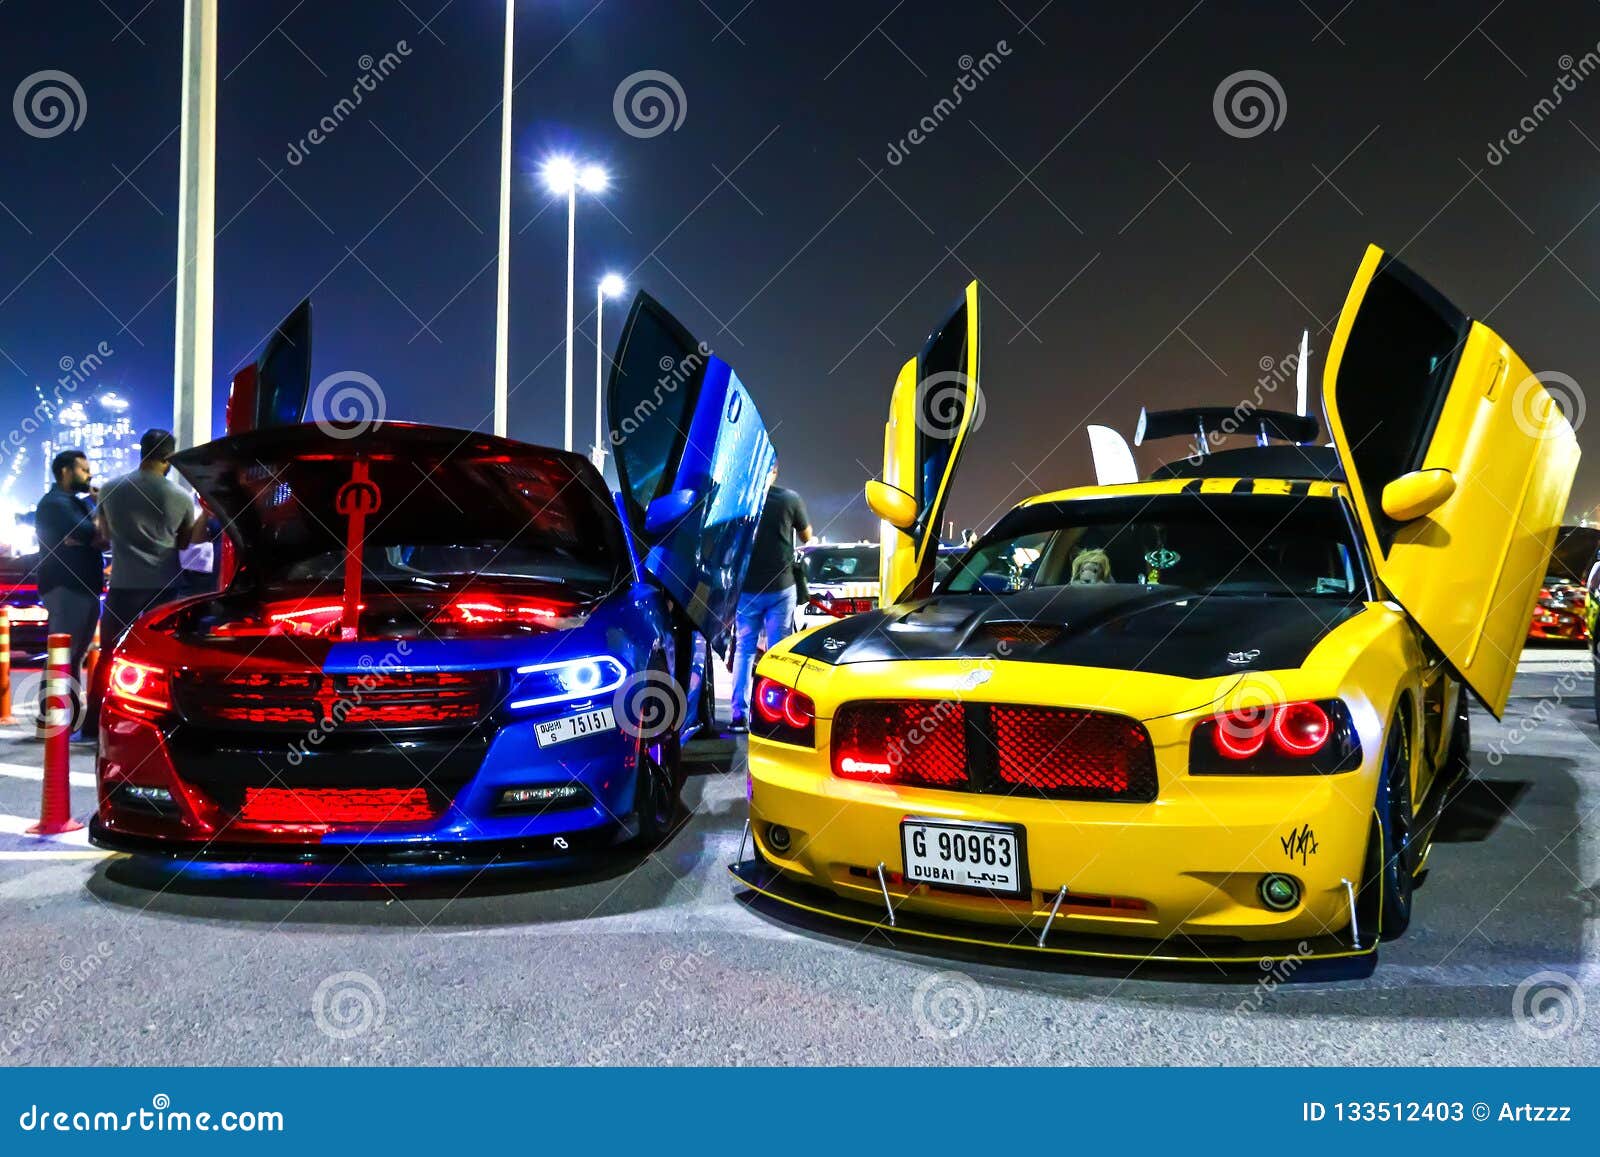 Dodge Charger editorial stock photo. Image of gulf, american - 133512403